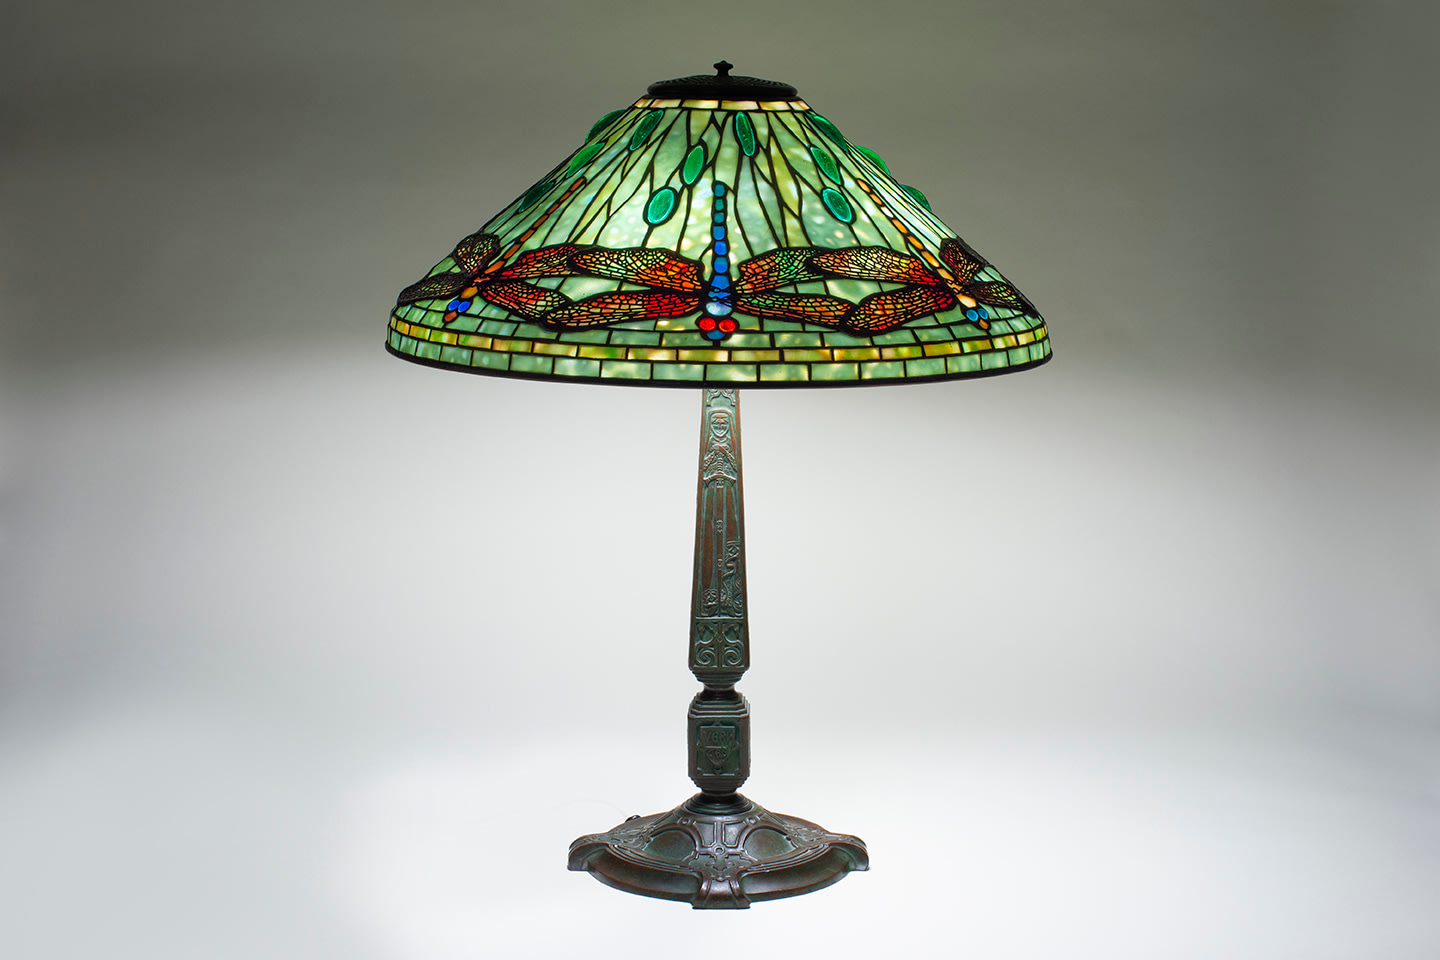 a leaded glass original tiffany lamp with dragonfly shade, depicting a series of downward facing dragonflies in a variety of glass colors ranging from green, blue and red, with rounded glass gems for the eyes, against a background of mottled glass in a shade of pale blue-green